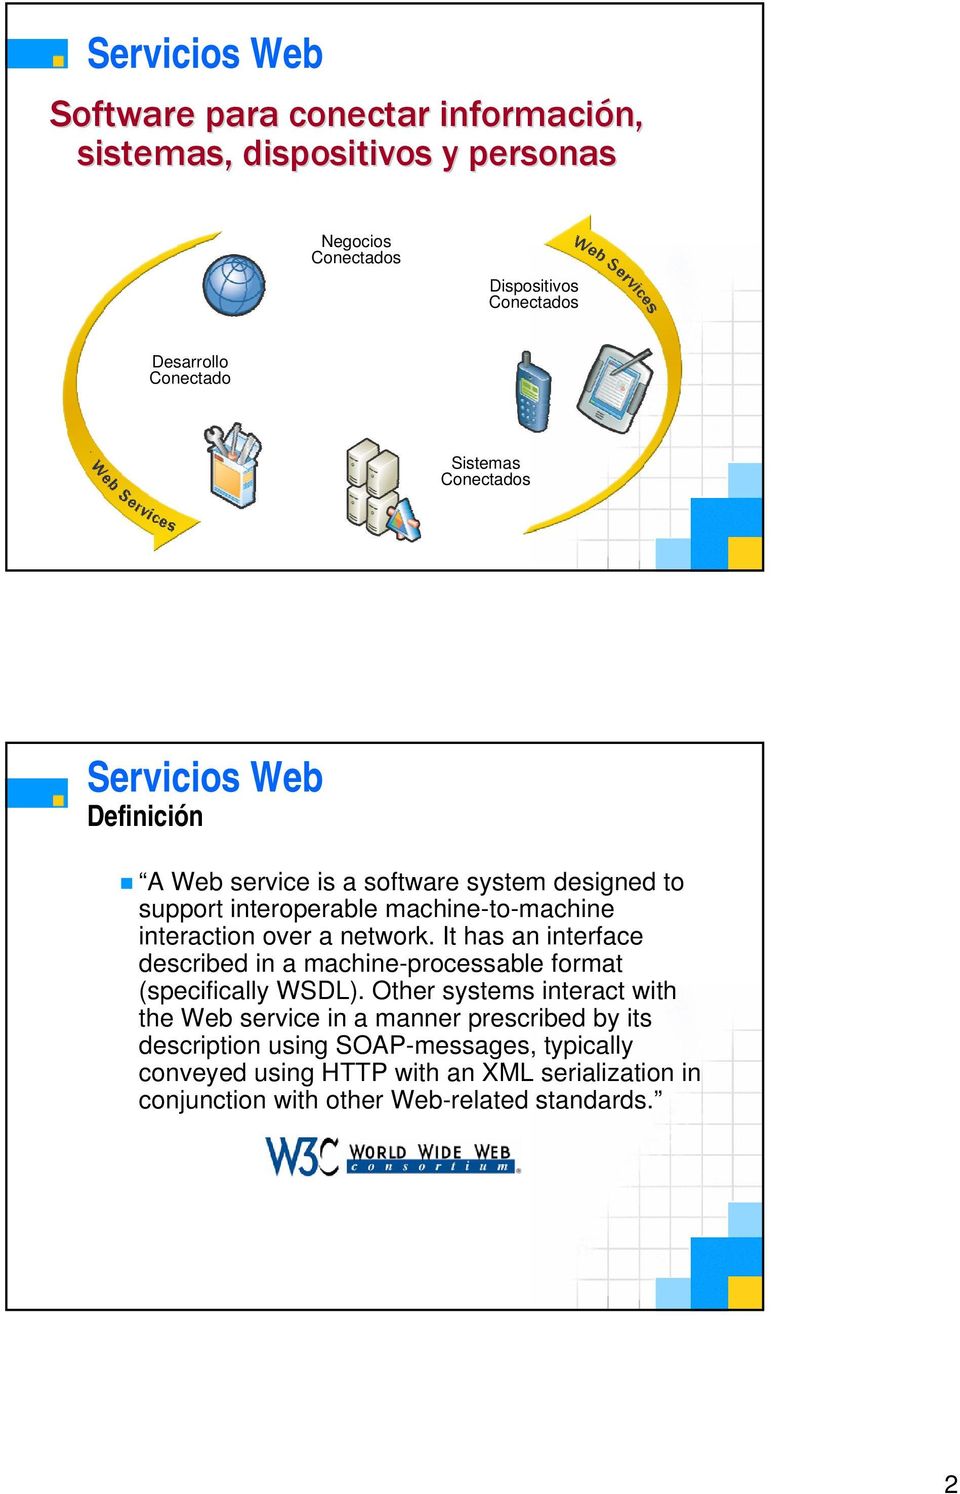 network. It has an interface described in a machine-processable format (specifically WSDL).